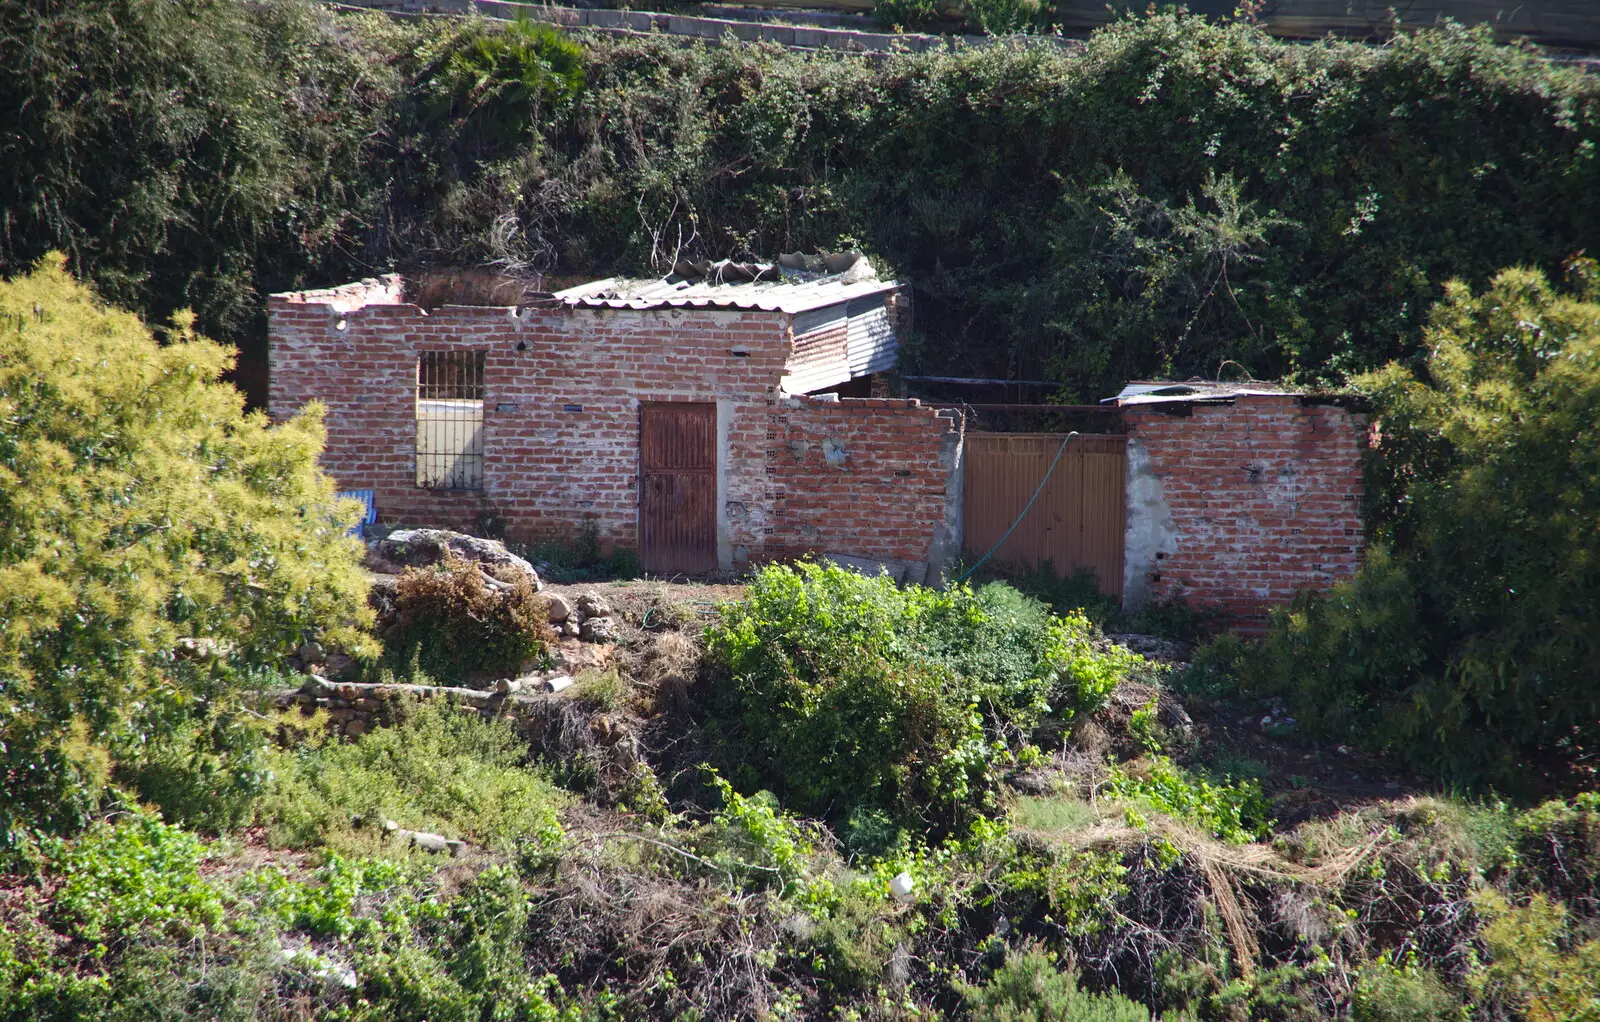 Some sort of derelict building, from The Caves of Nerja, and Frigiliana, Andalusia, Spain - 18th April 2019